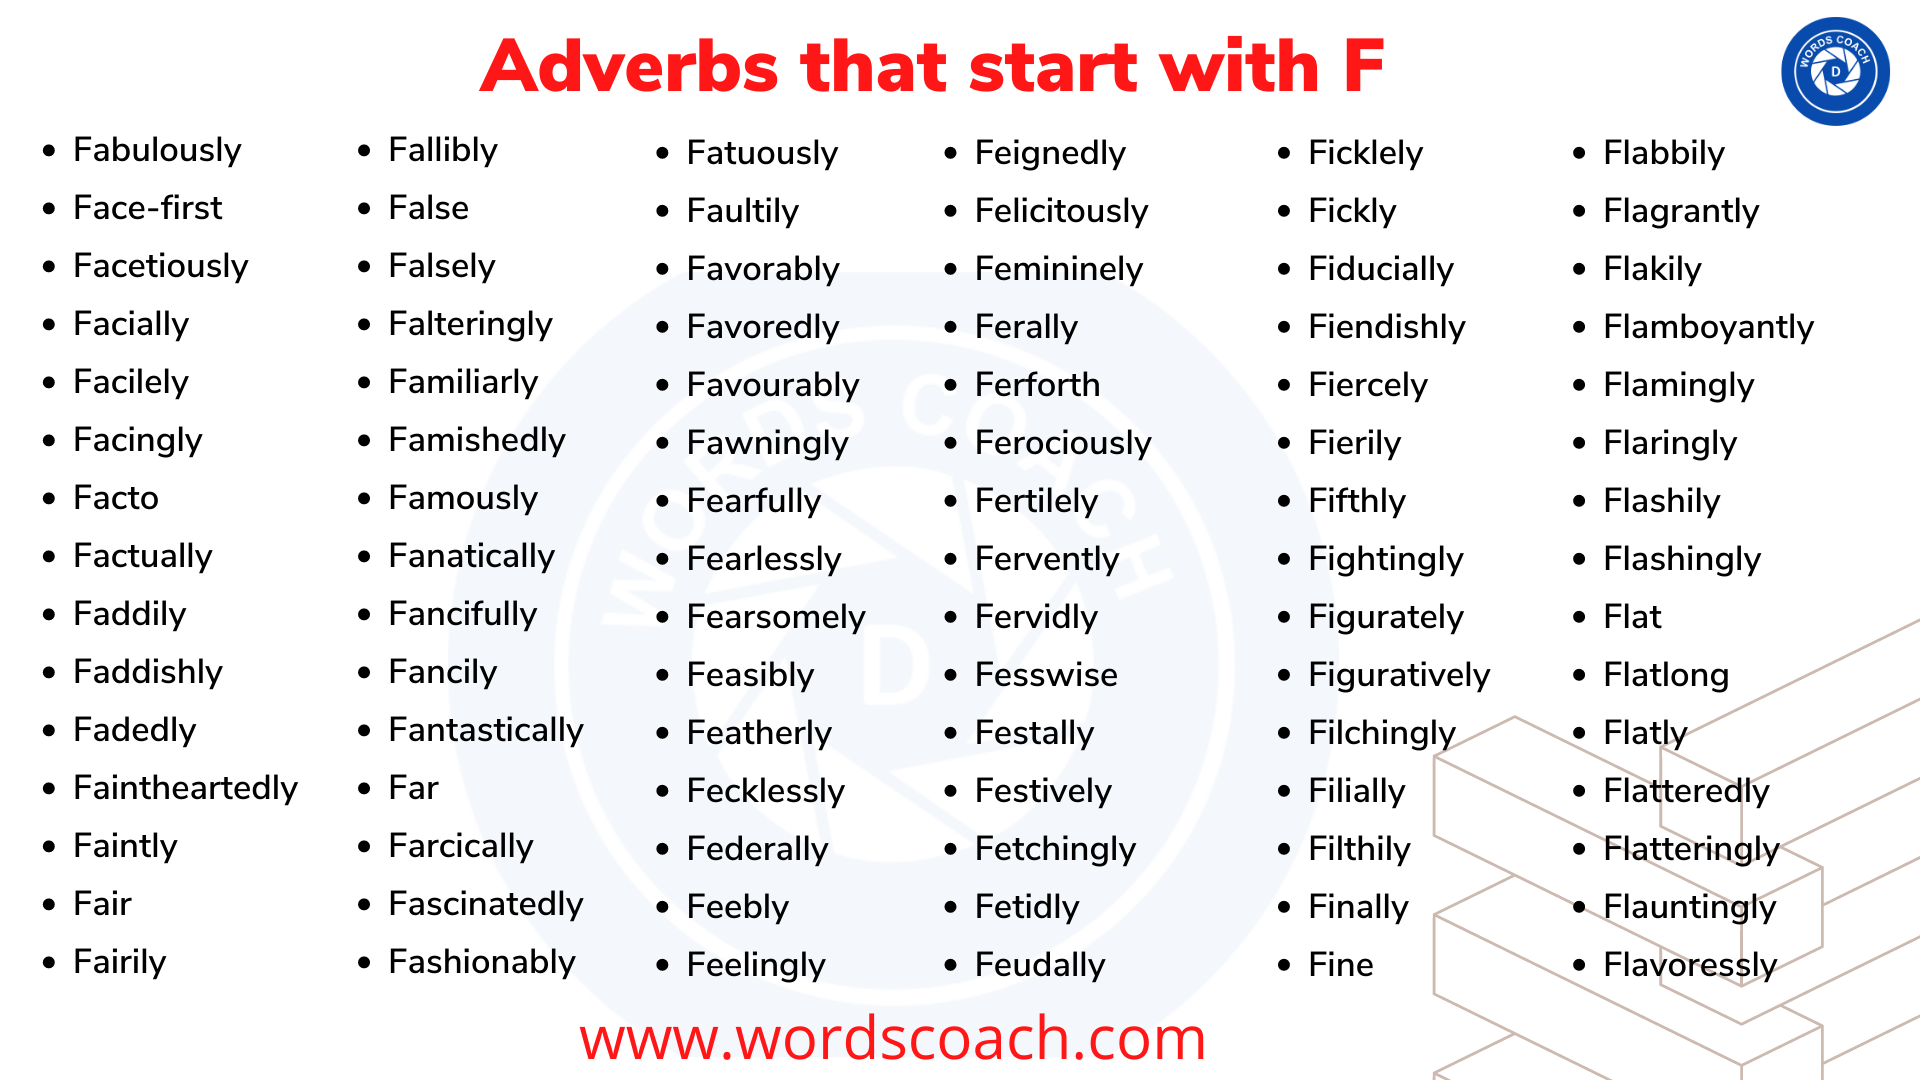 Adverbs that start with F - wordscoach.com